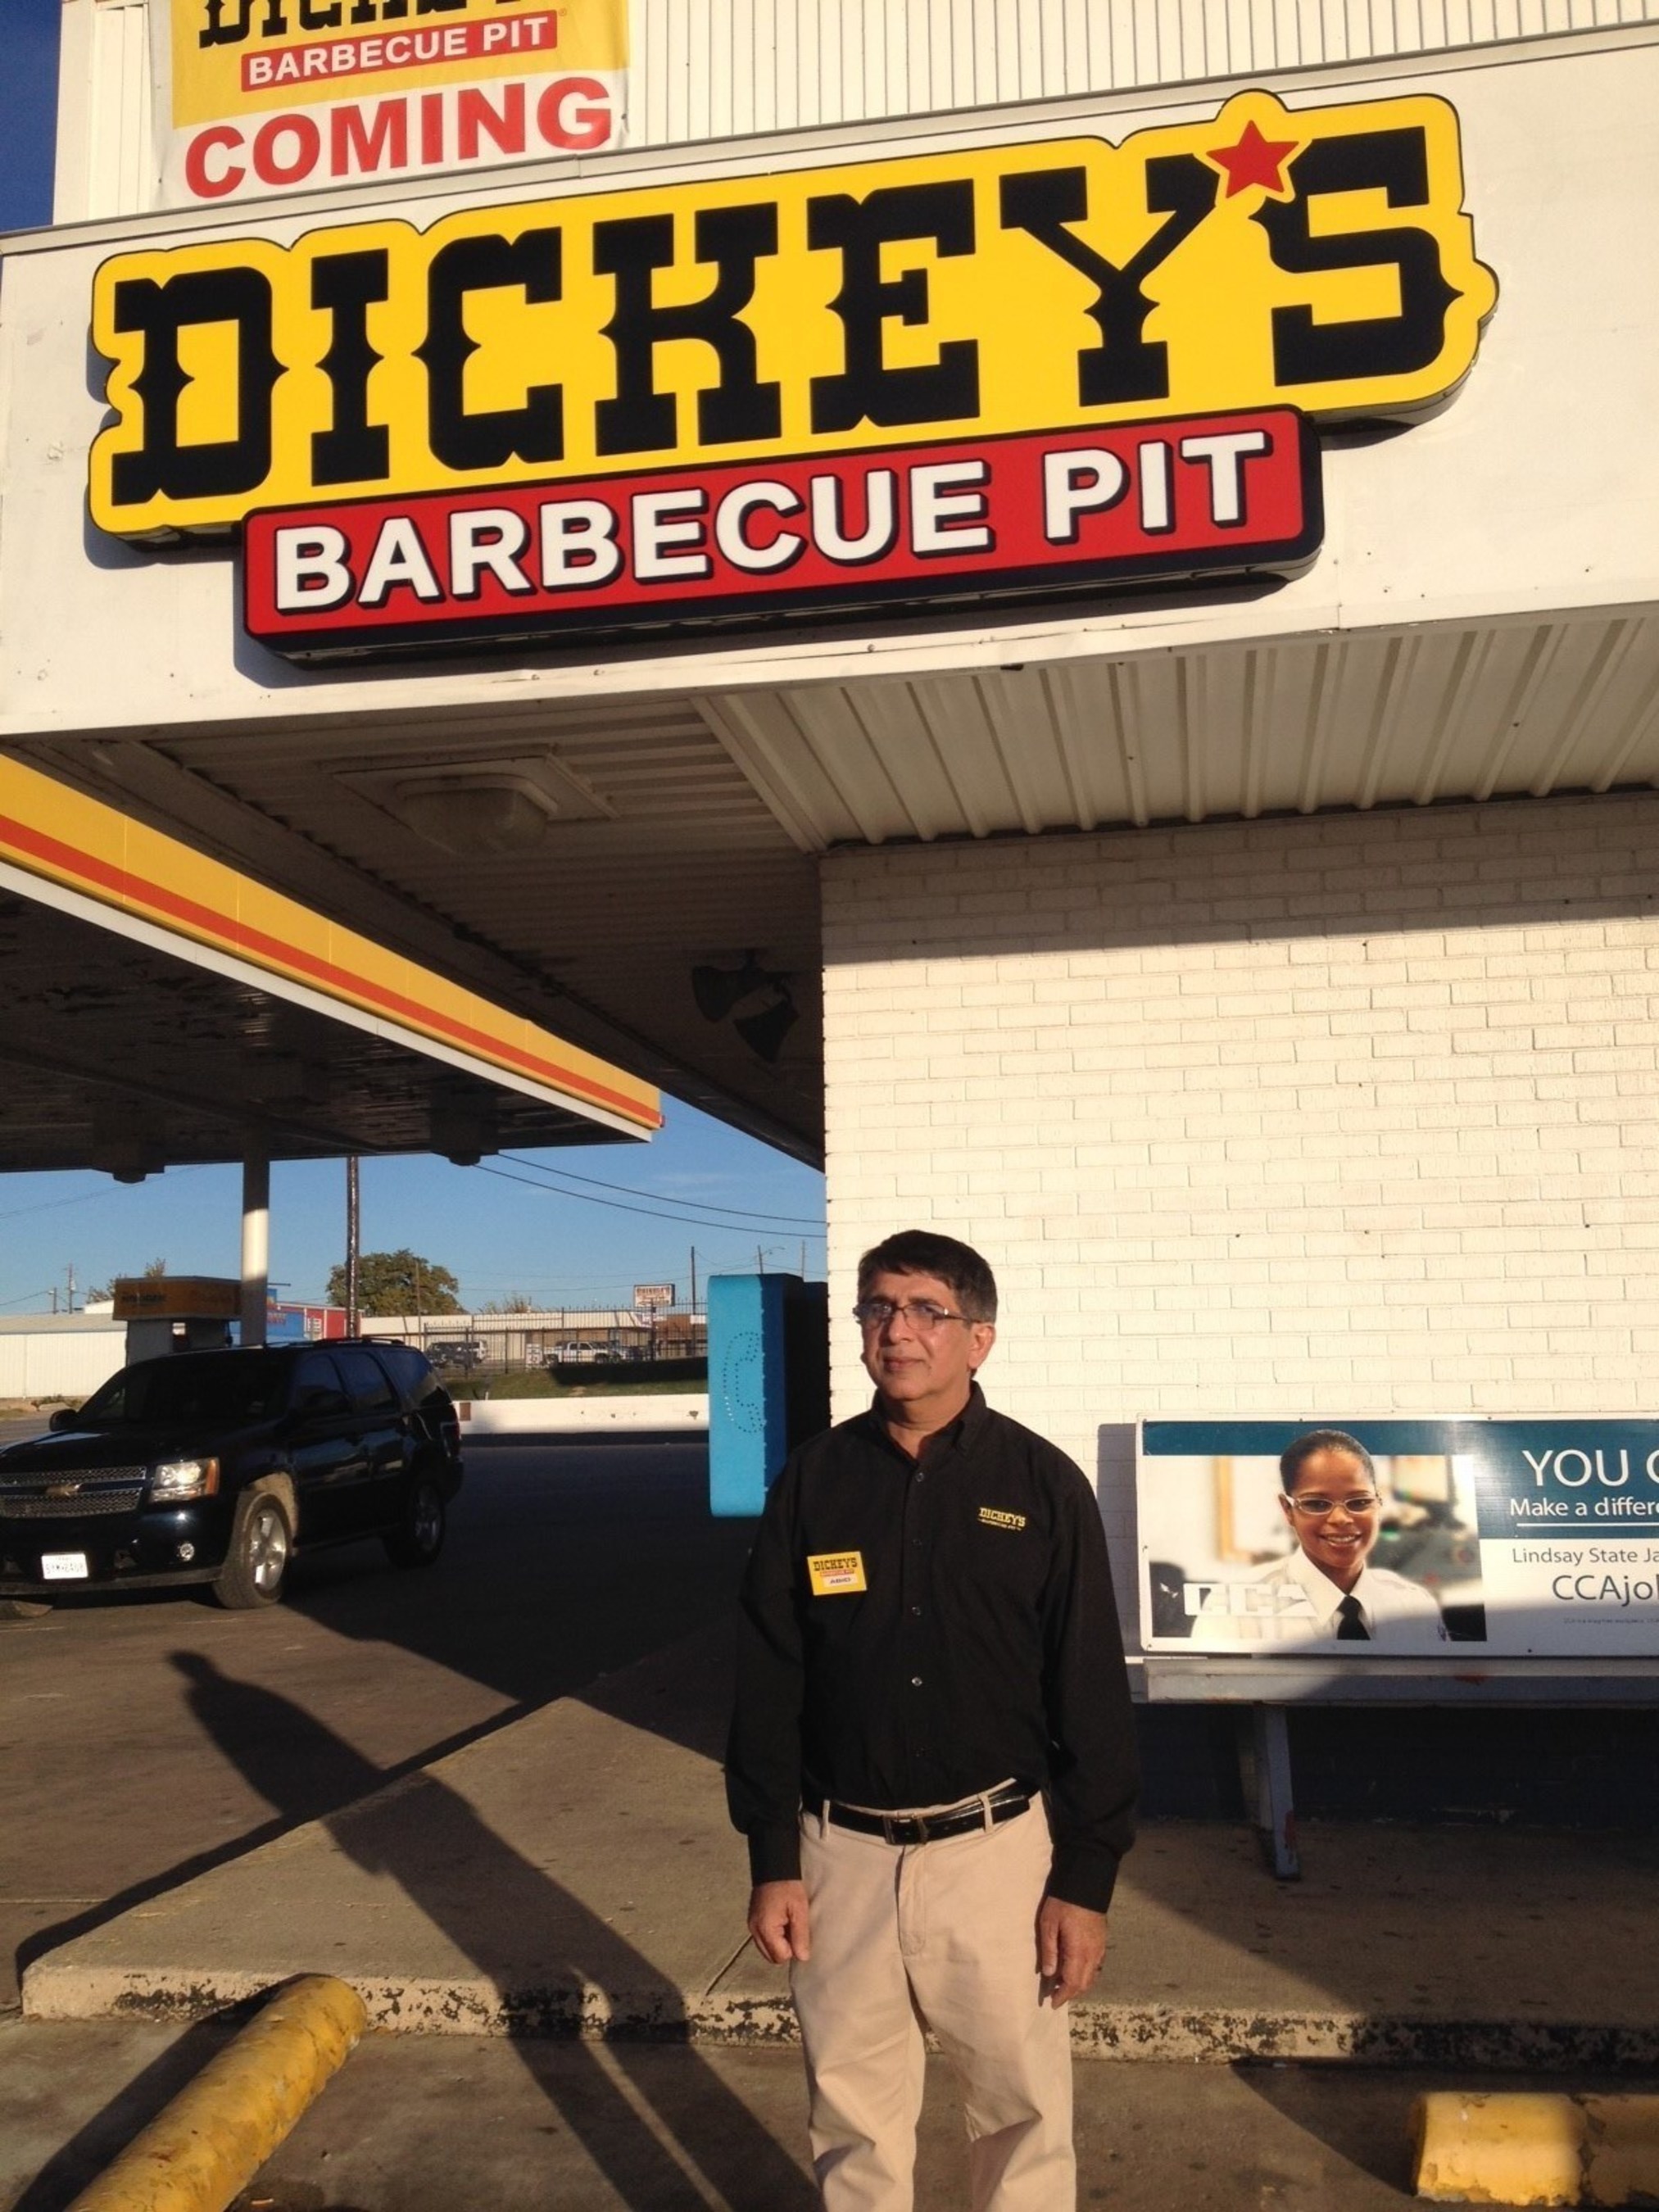 Dickey's Barbecue Pit arrives to Springtown on Thursday with a three day grand opening celebration. The first 50 guests receive gift cards worth up to $50.